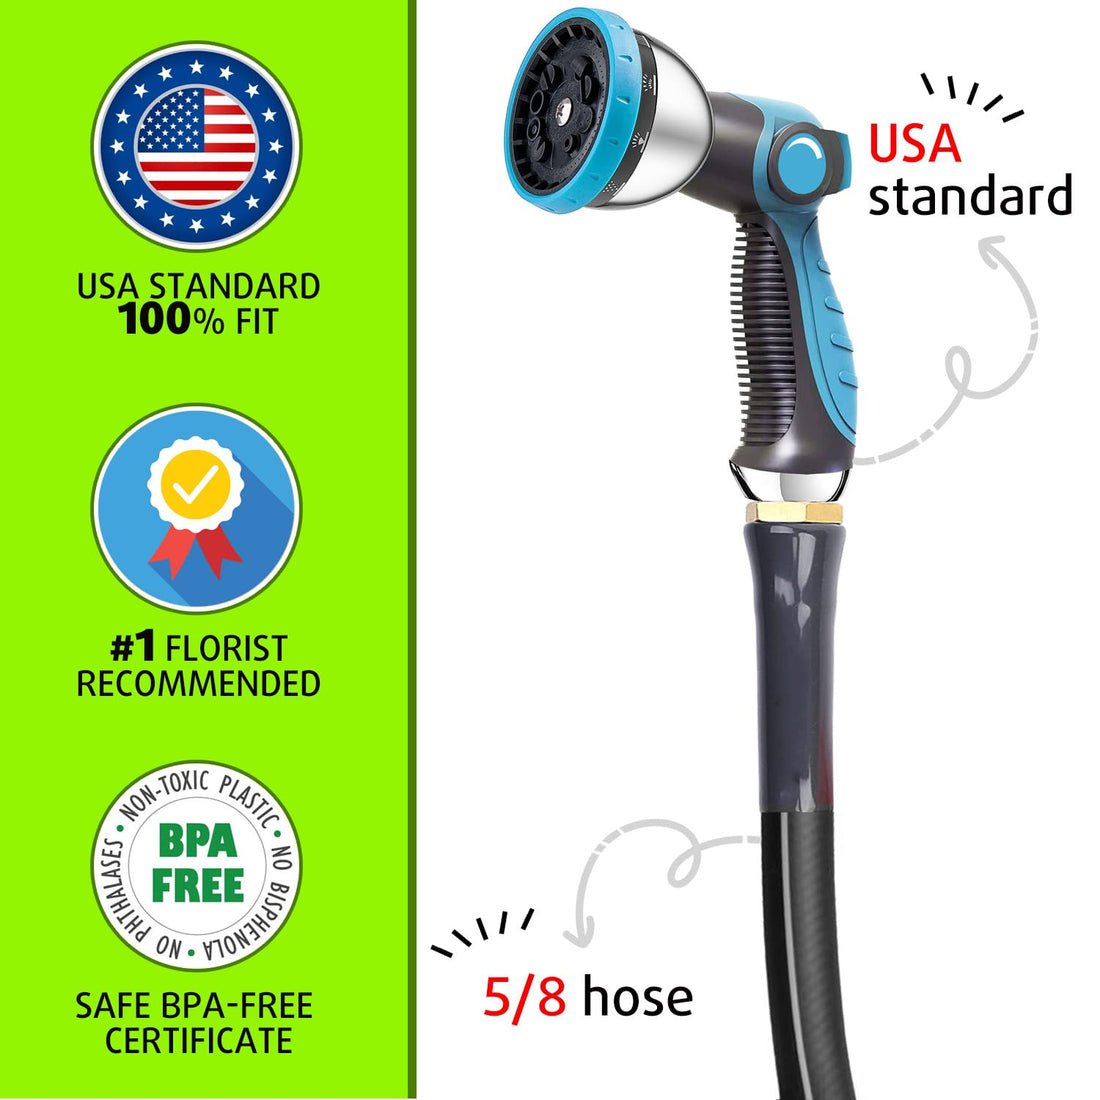 Garden Hose Nozzle Sprayer Heavy Duty - Features 10 Spray Patterns, THUMB CONTROL On Off Valve for Easy Water Control